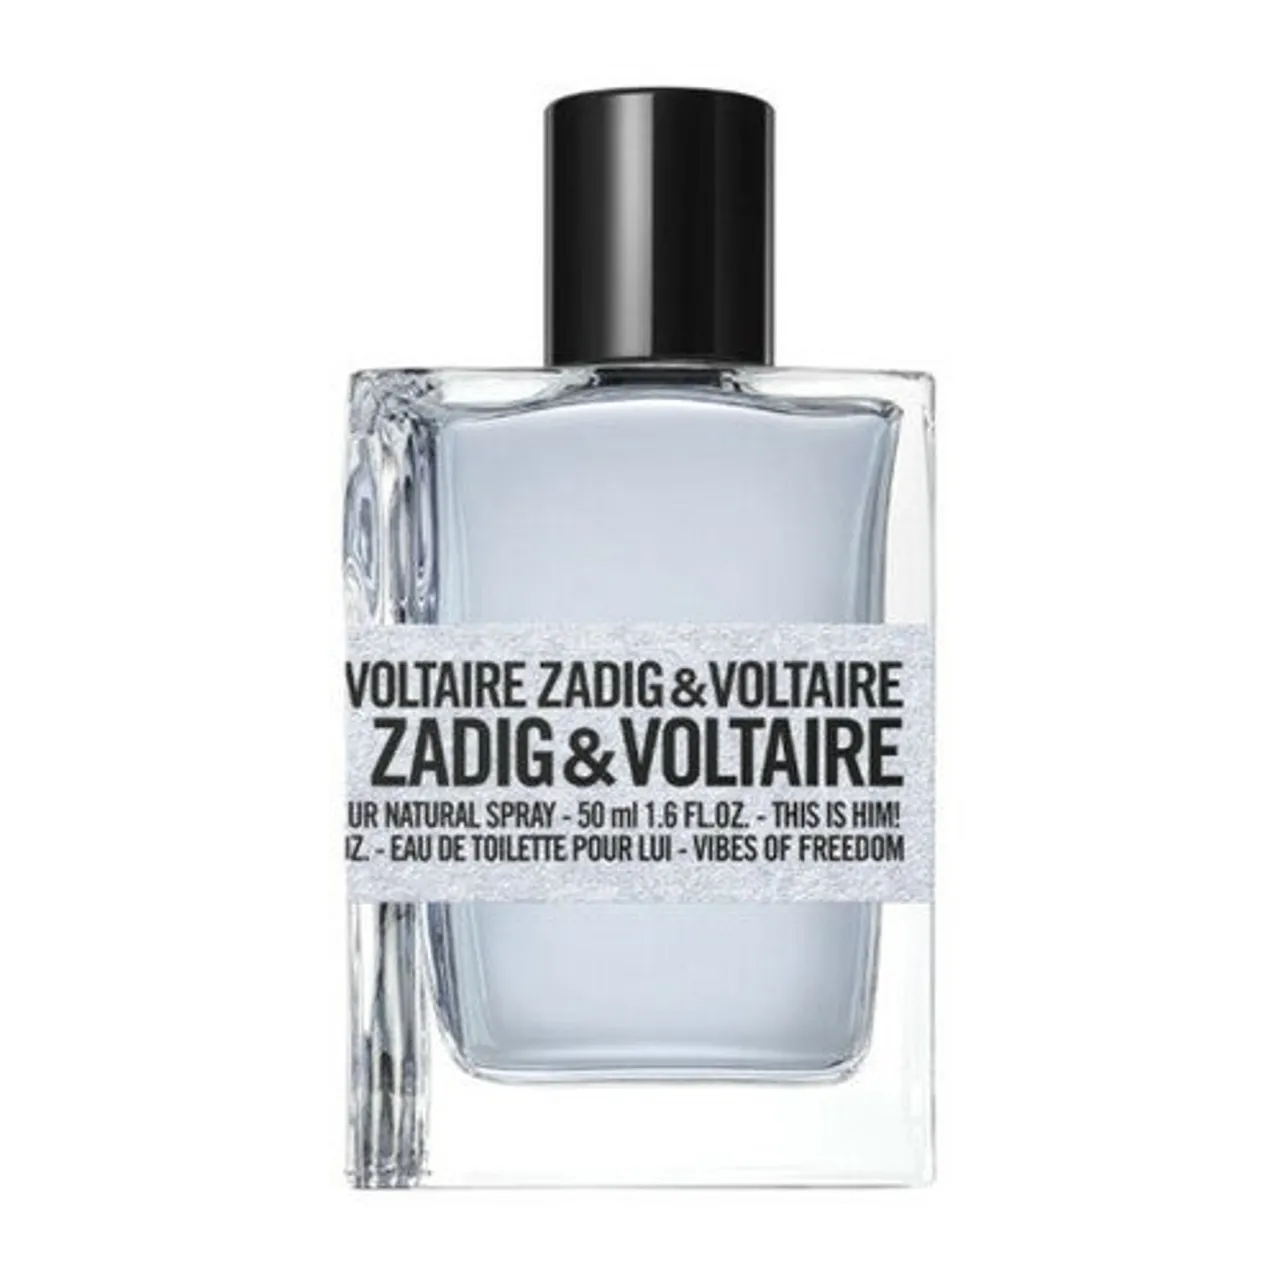 Zadig&Voltaire This is Him! Vibes of Freedom Eau de Toilette 50 ml